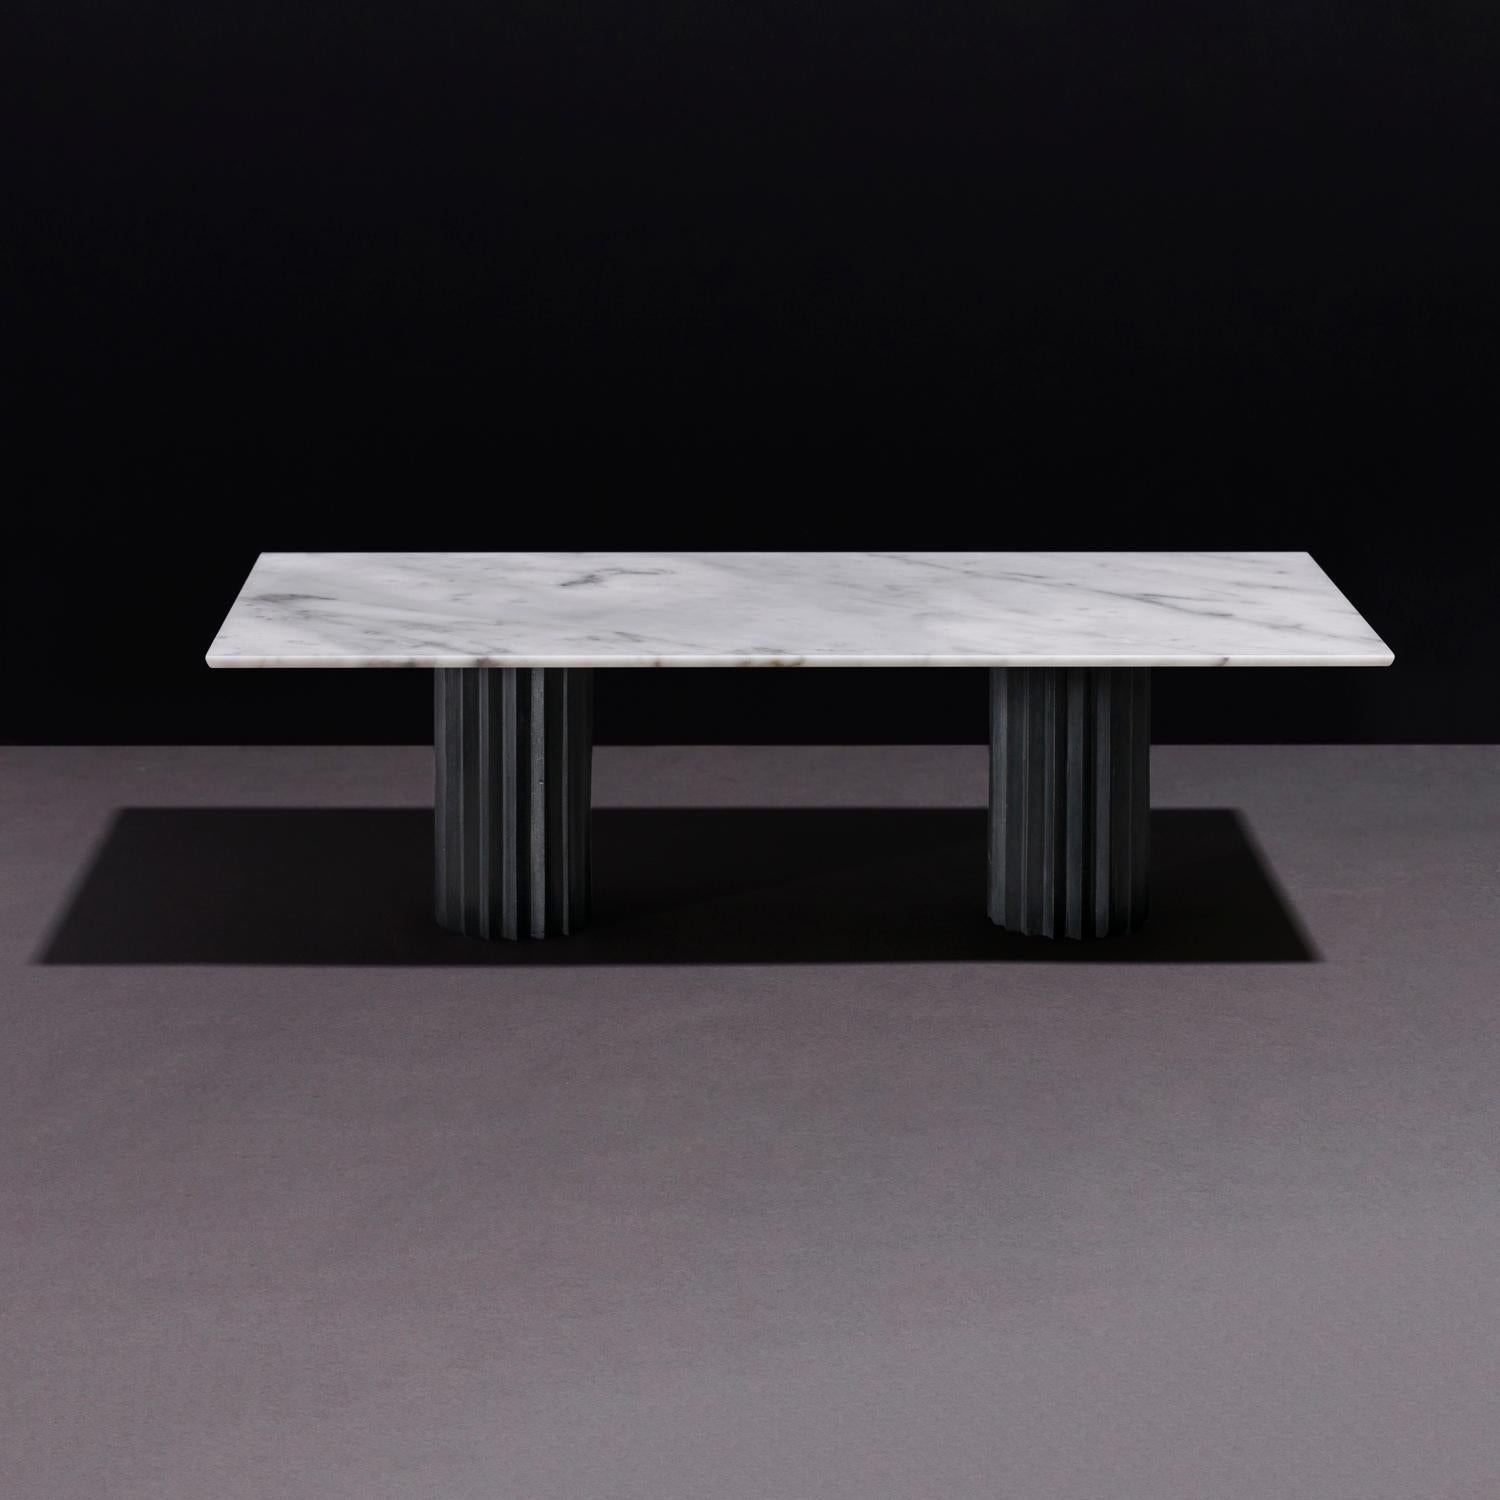 Patinated Doris White Carrara Marble Rectangular Dining Table by Fred and Juul For Sale